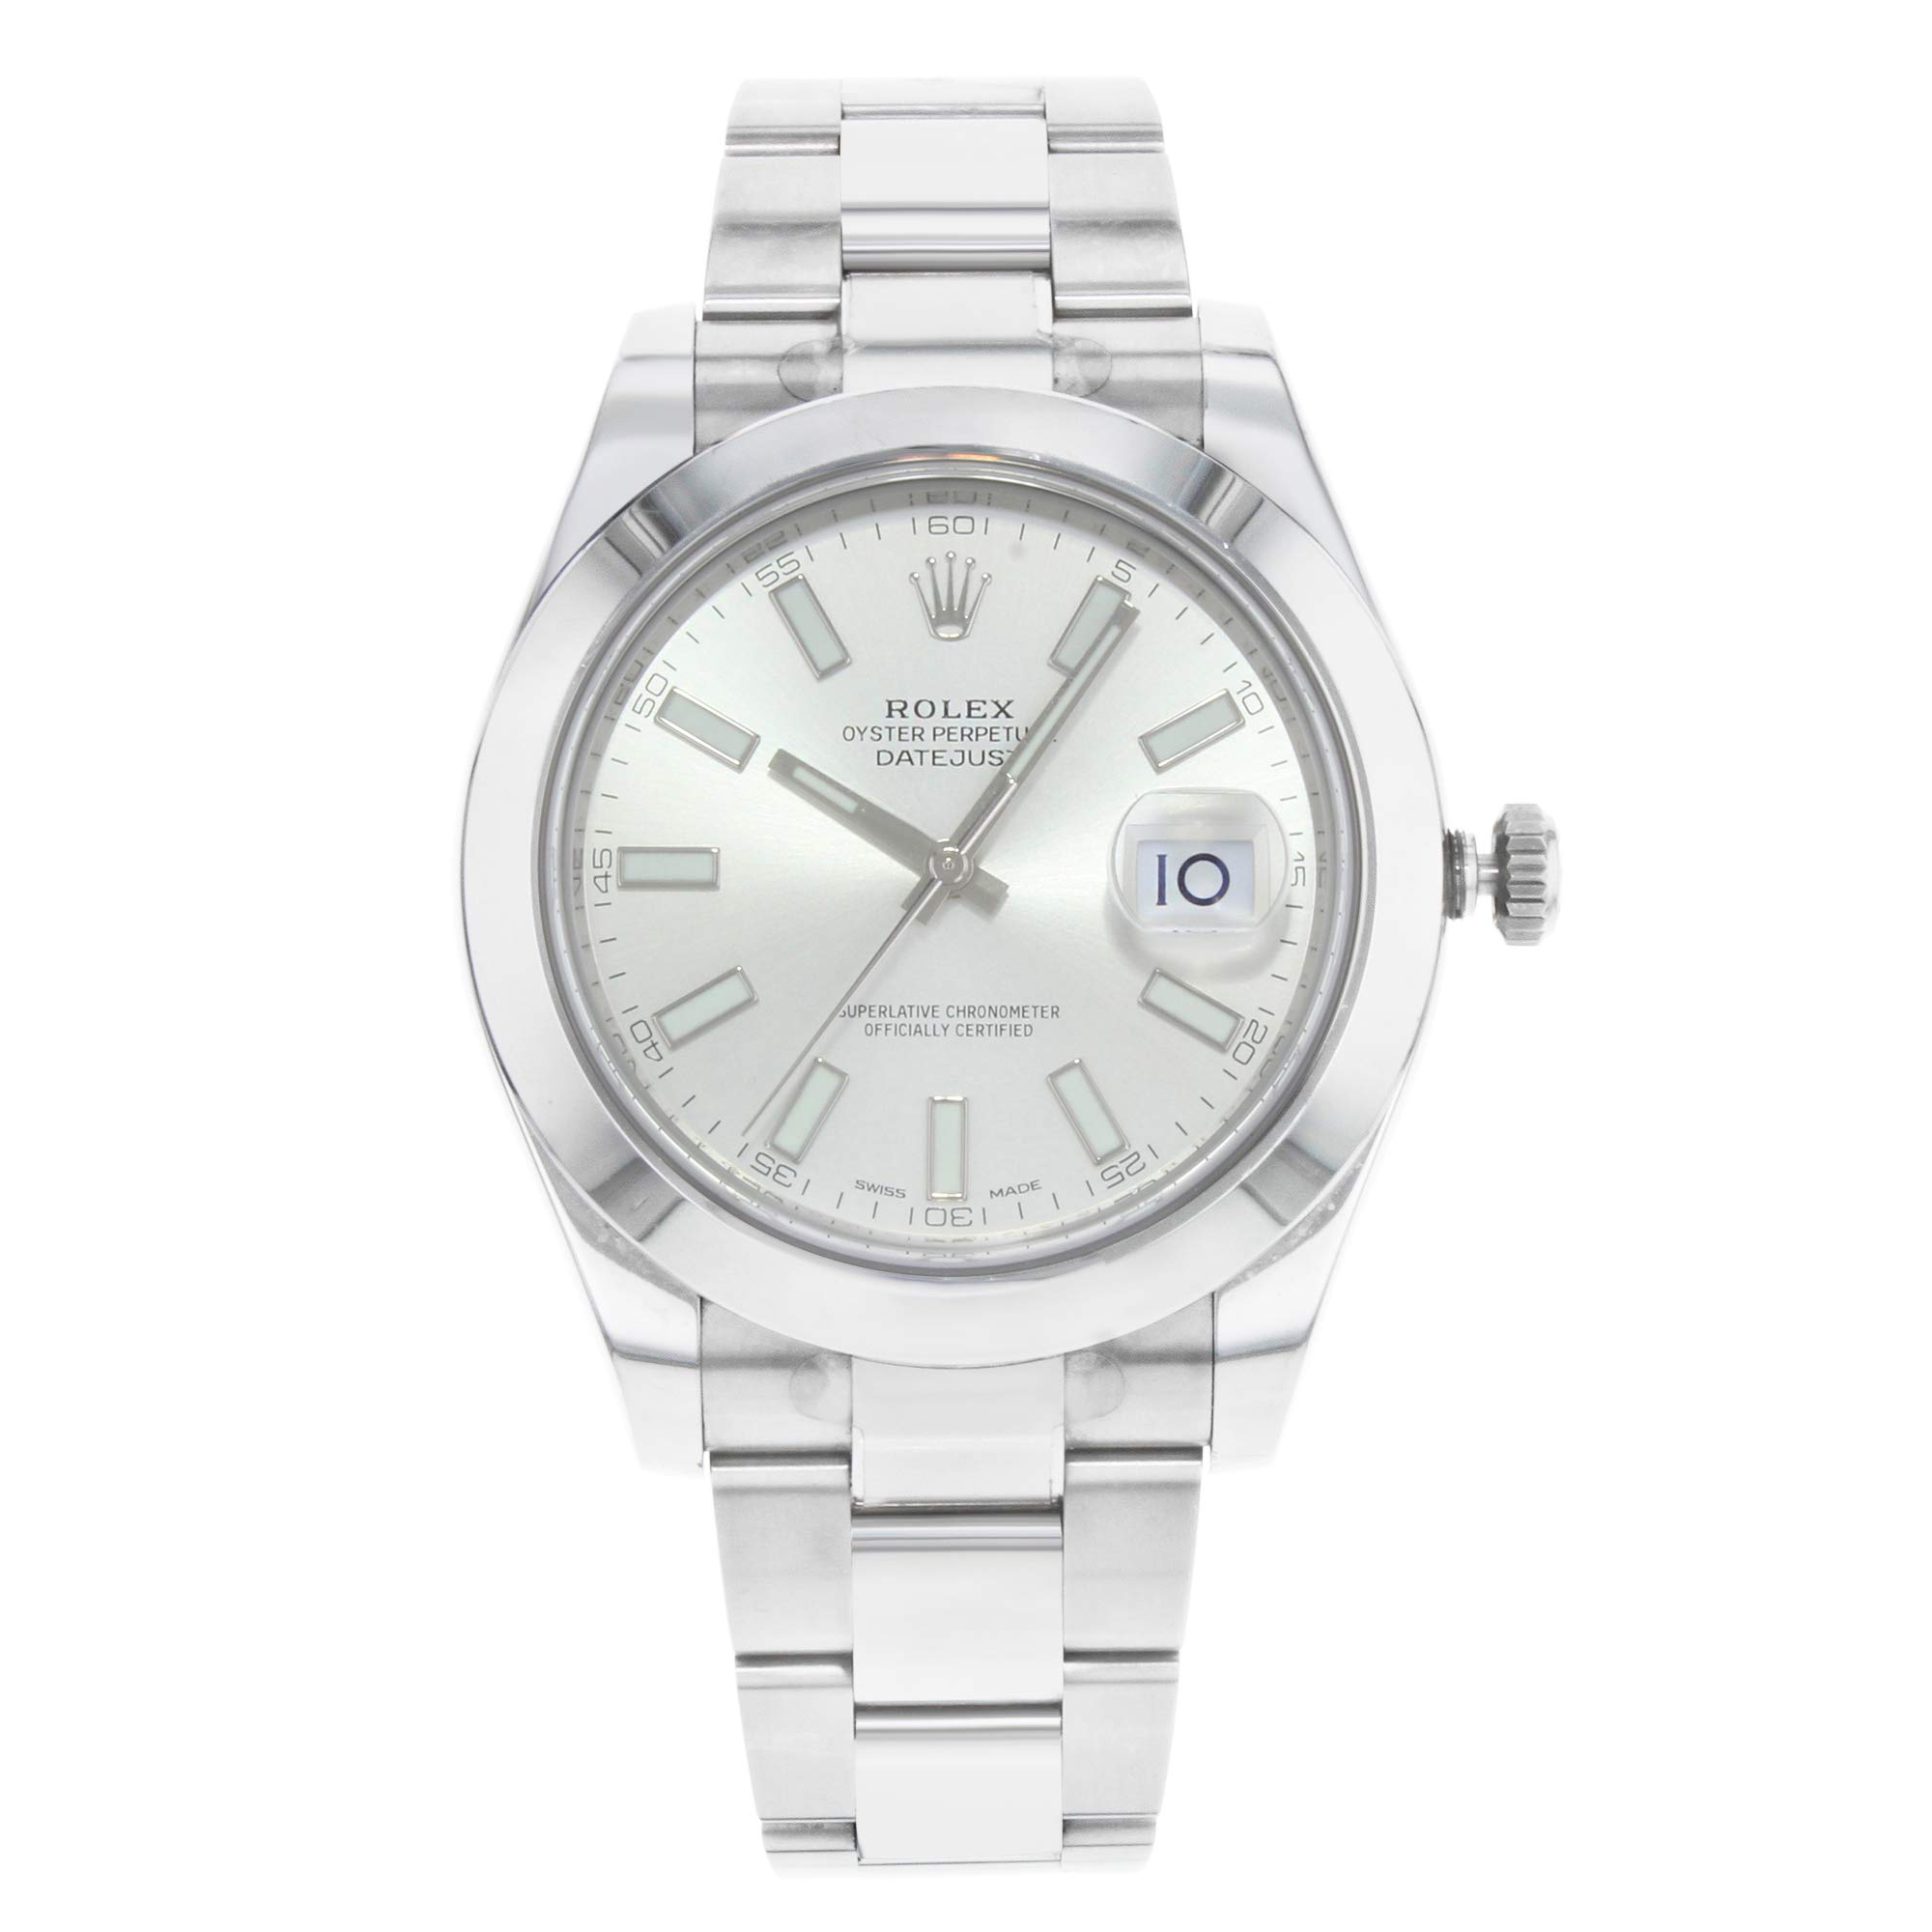 Rolex Datejust II Automatic Silver Dial Stainless Steel Mens Watch 116300SSO